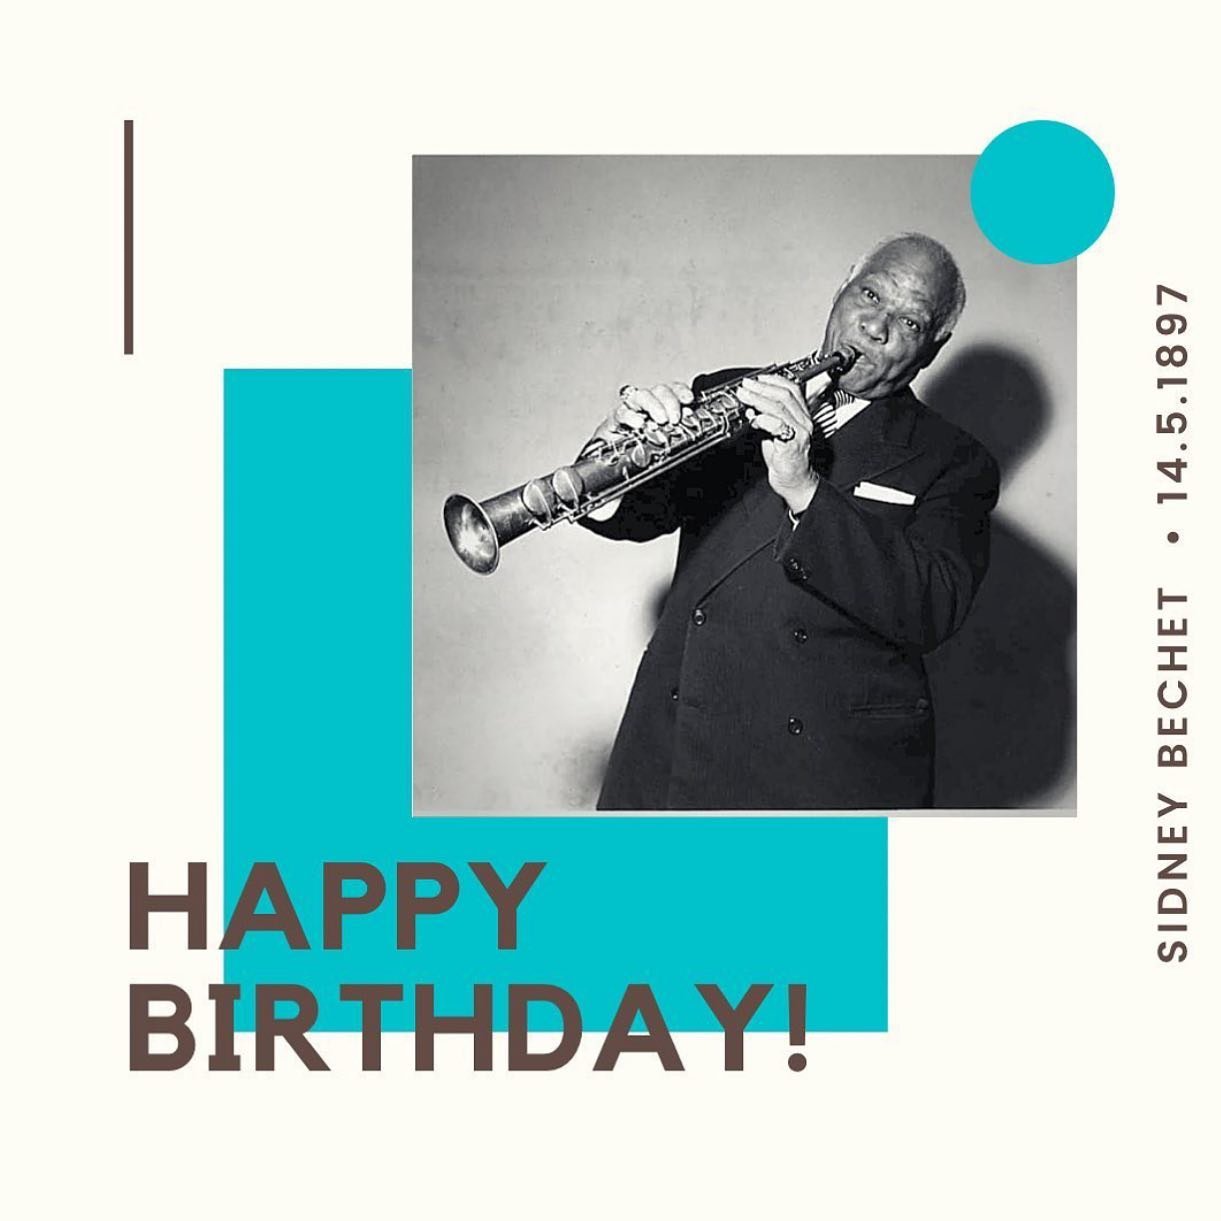 Happy Birthday to the jazz pioneer Sidney Bechet 🎉 

Born in New Orleans, Bechet was one of the first jazz soloists and Duke Ellington referred to him as &ldquo;the epitome of jazz.&rdquo;

📚 Learn more about his style and legacy: https://www.npr.o